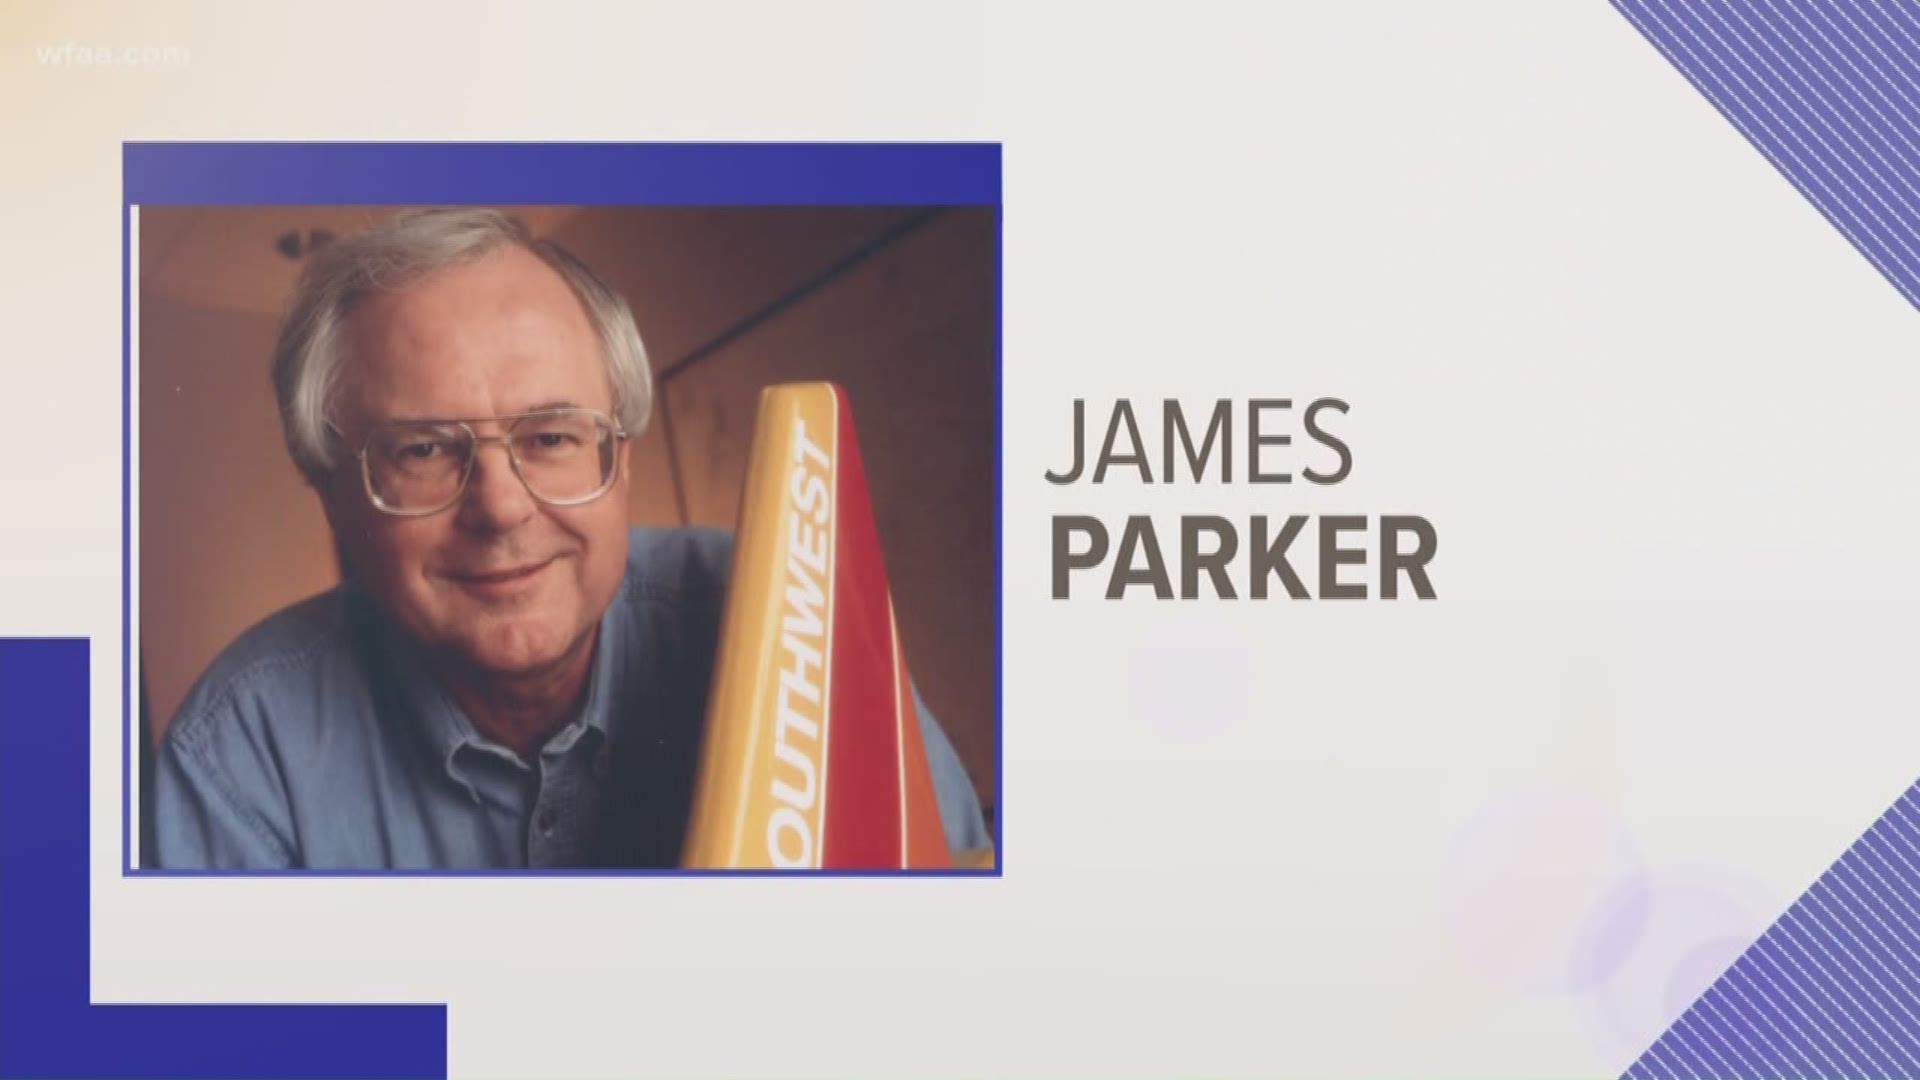 Parker is credited for his exemplar leadership of the company immediately following the Sept. 11, 2001 attacks.